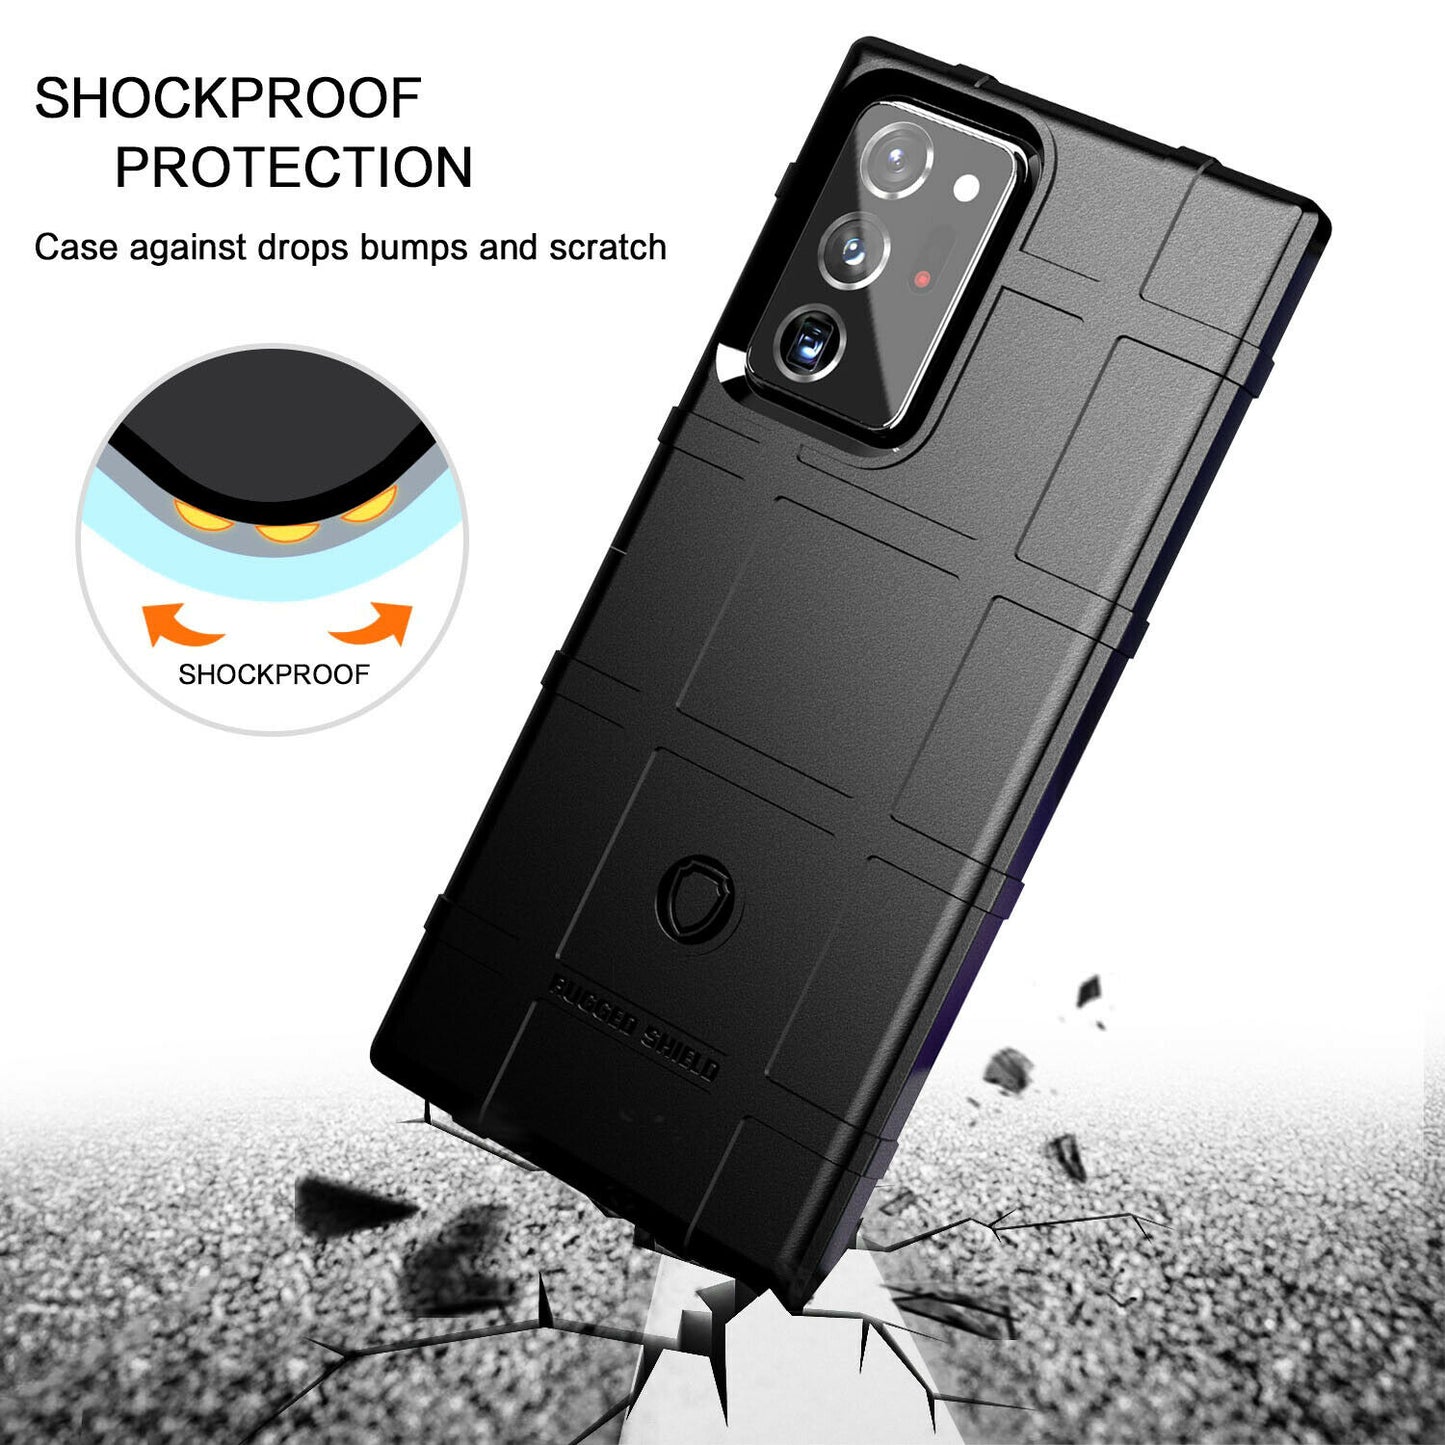 Rugged Shield Rubber Protective Case For Samsung Galaxy S21/Note20 - carolay.co